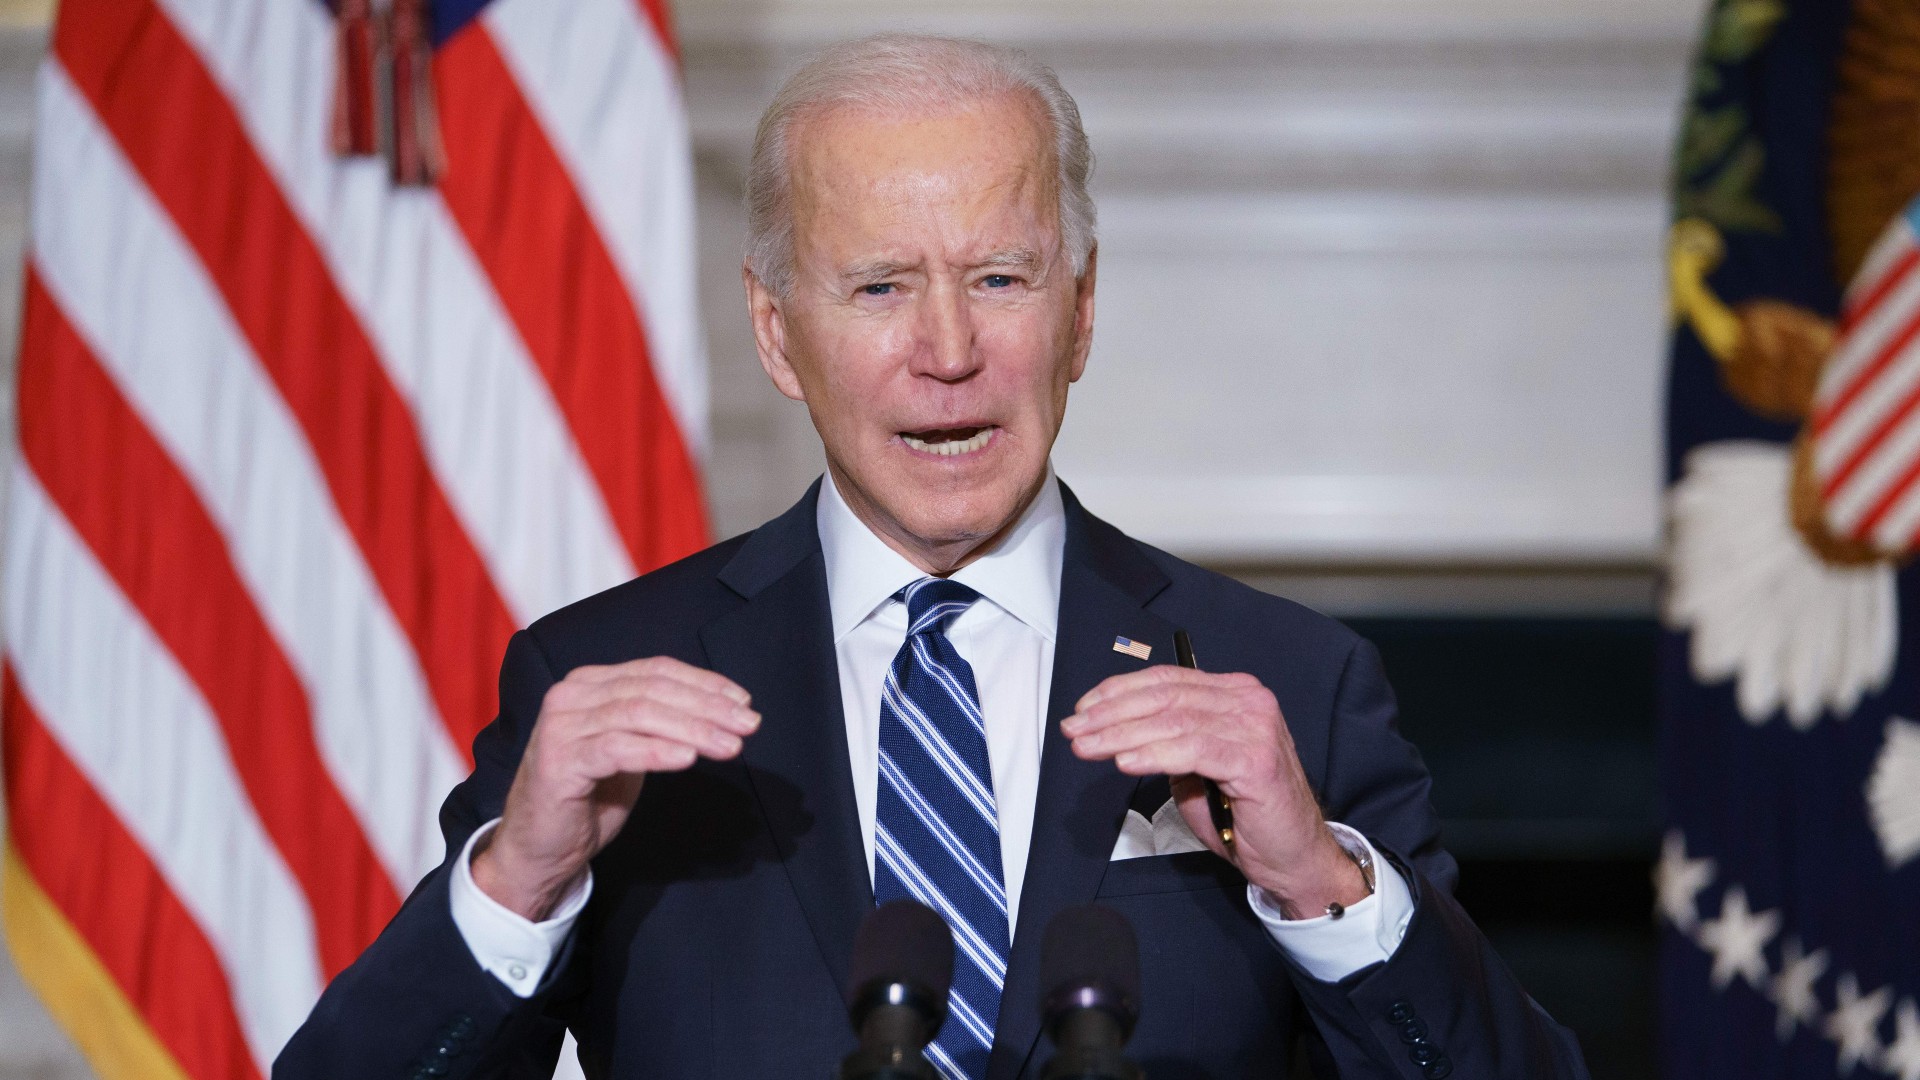 Decision time soon for Biden on Iran nuclear deal